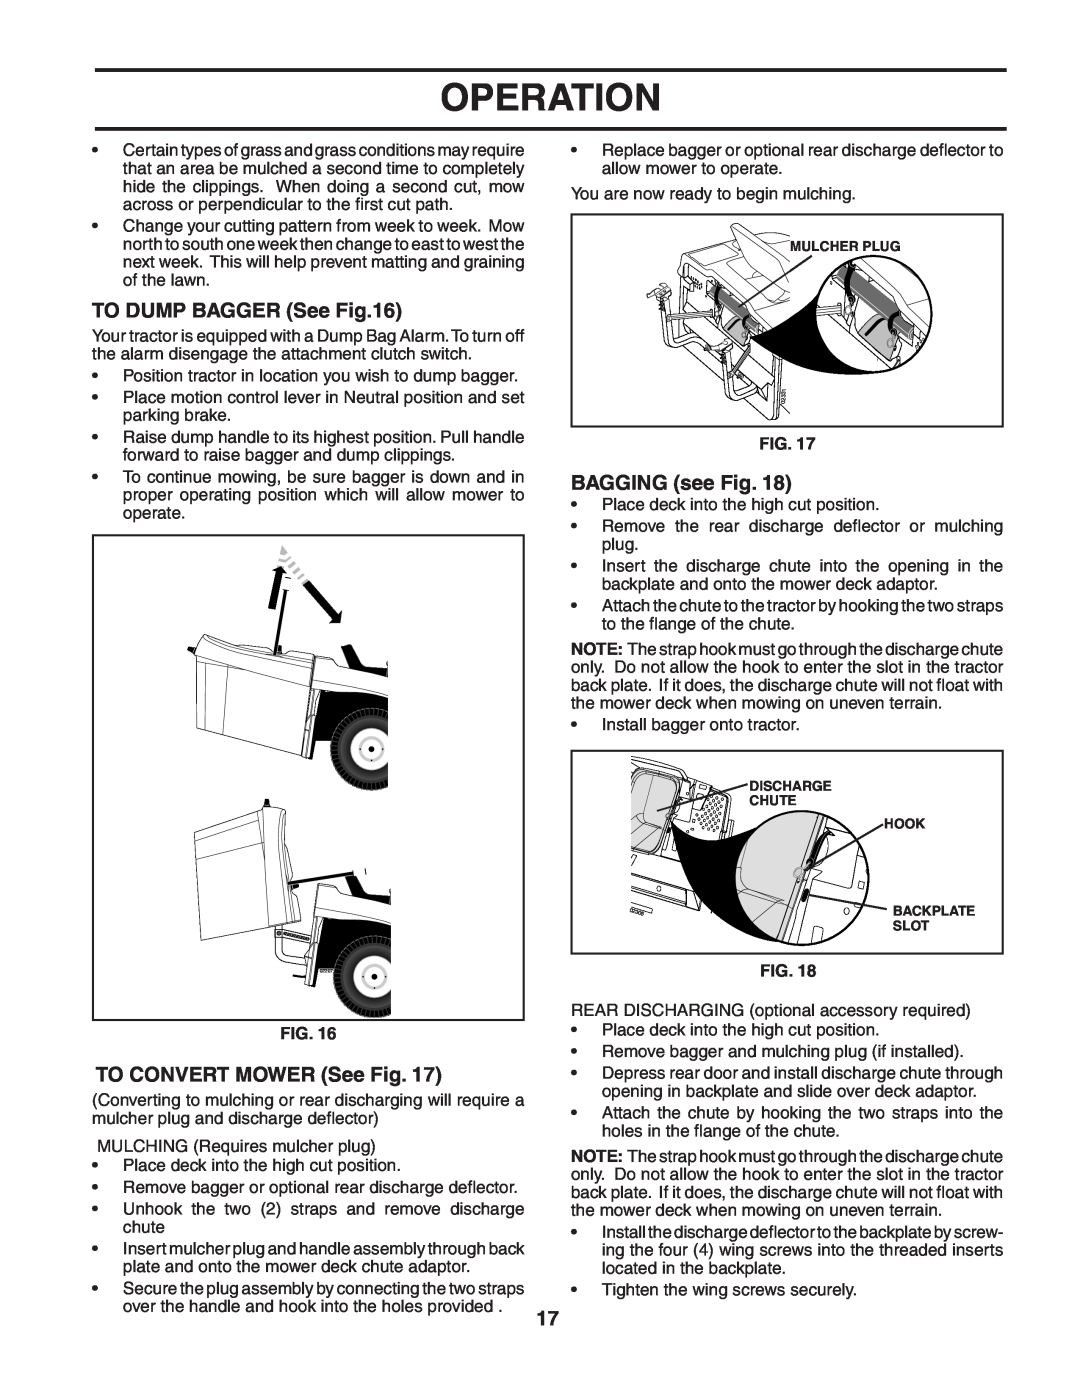 Husqvarna CTH151 owner manual TO DUMP BAGGER See, TO CONVERT MOWER See Fig, BAGGING see Fig, Operation 